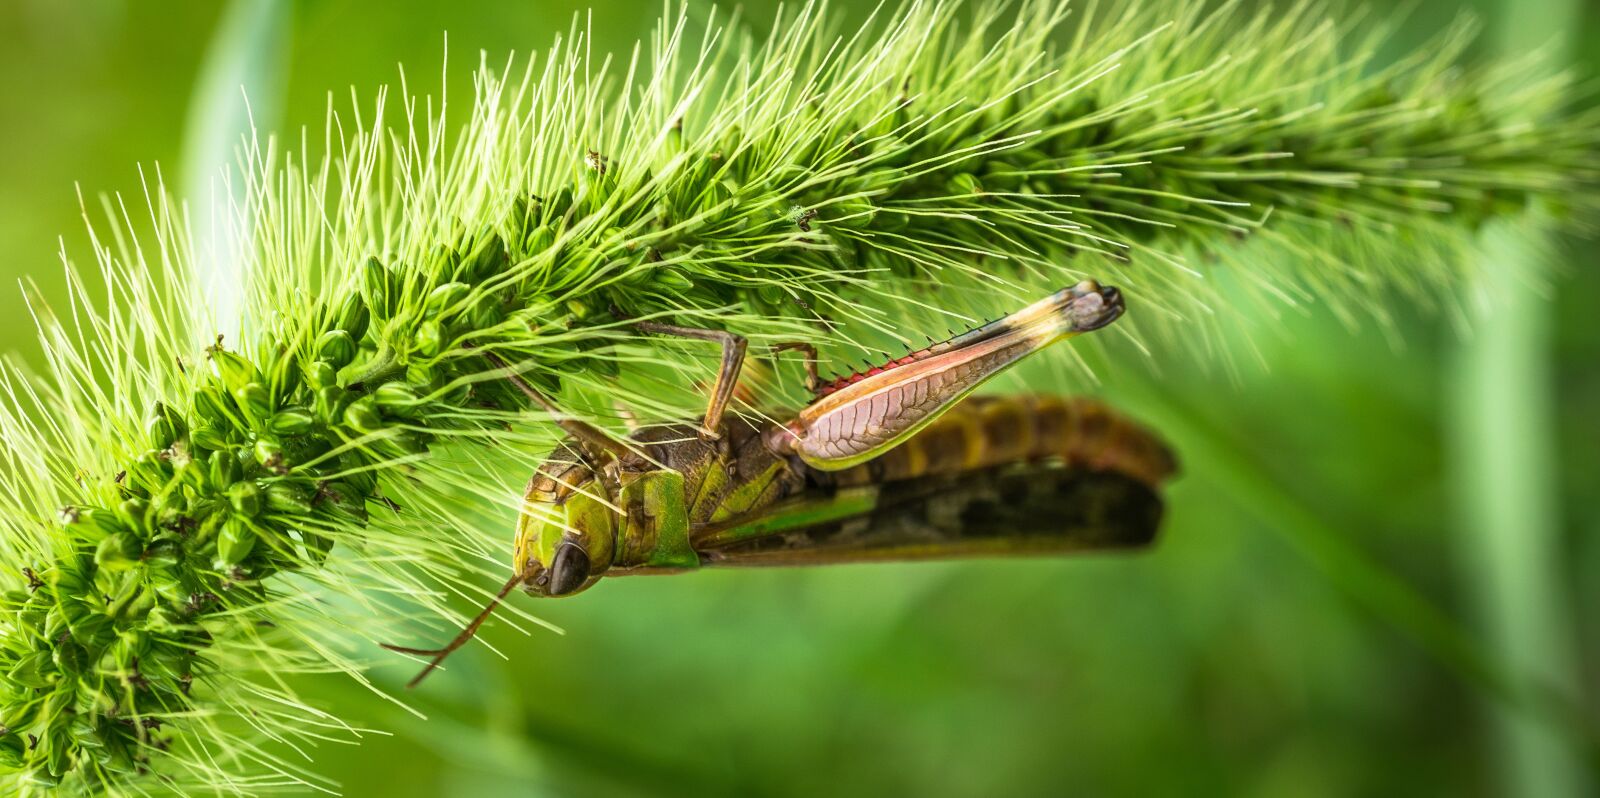 Sony E 30mm F3.5 Macro sample photo. Grasshopper, insects, nature photography